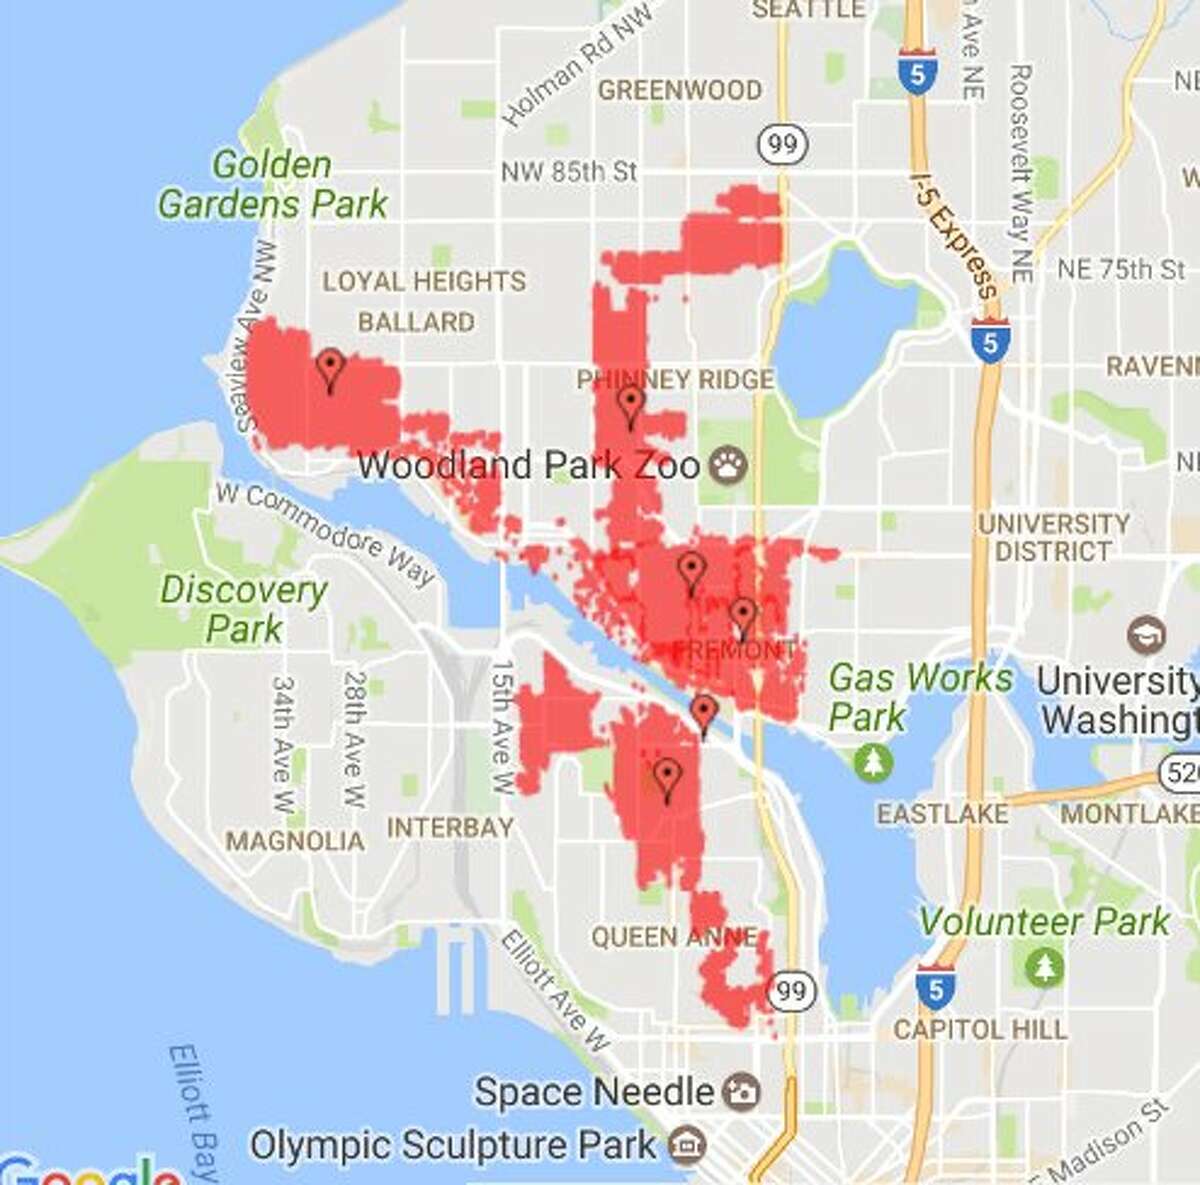 22,000 lost power in North Seattle